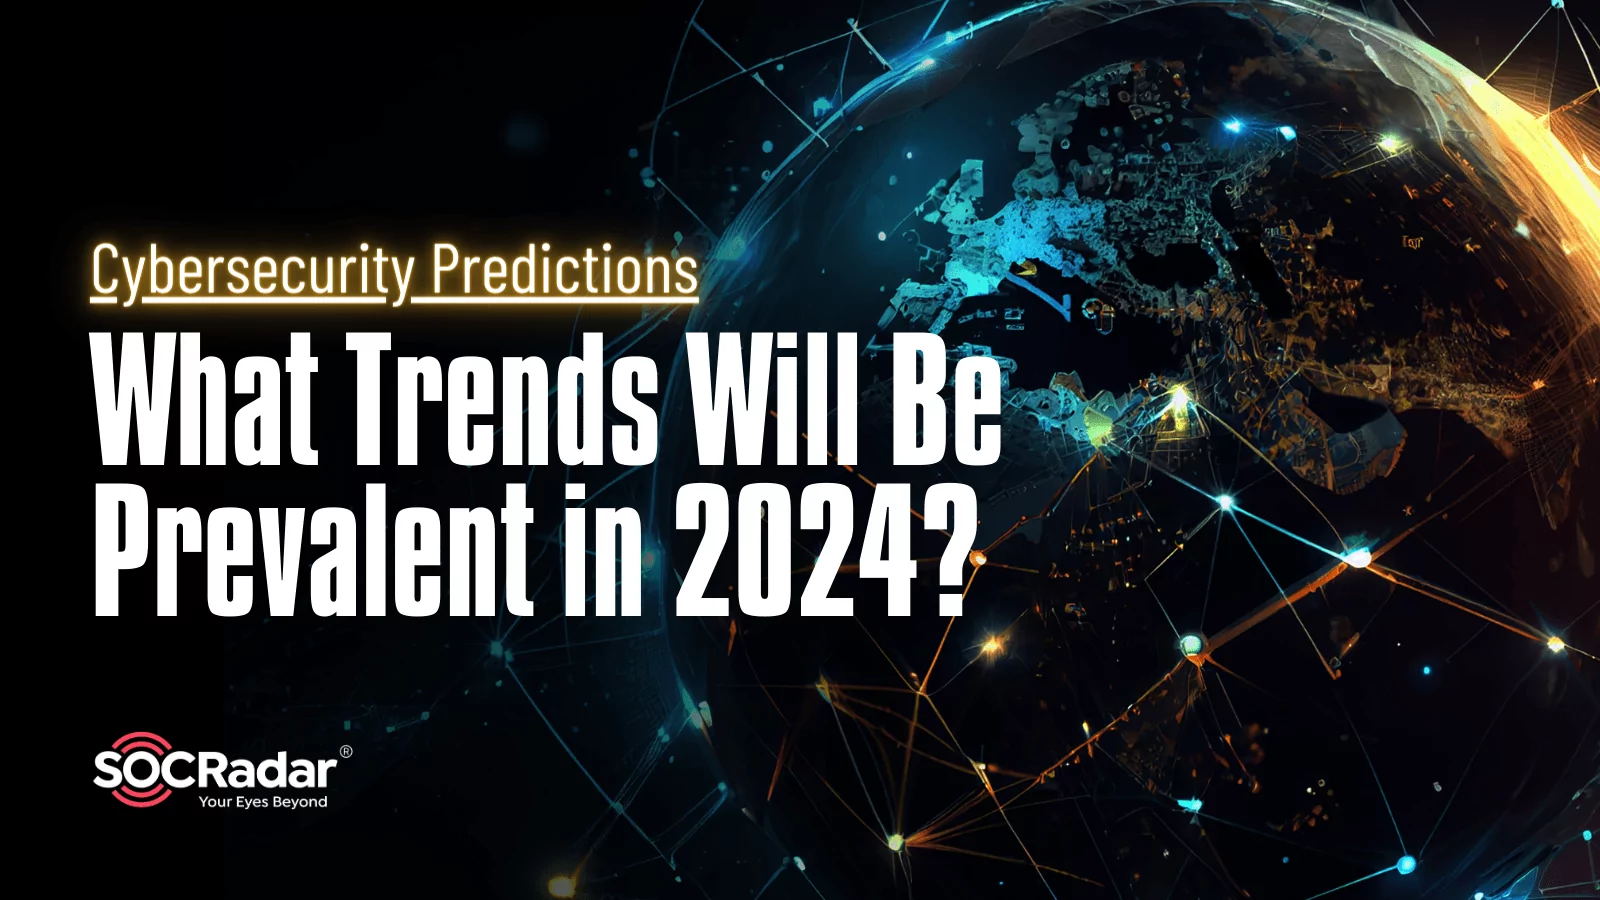 SOCRadar® Cyber Intelligence Inc. | Cybersecurity Predictions: What Trends Will Be Prevalent in 2024?